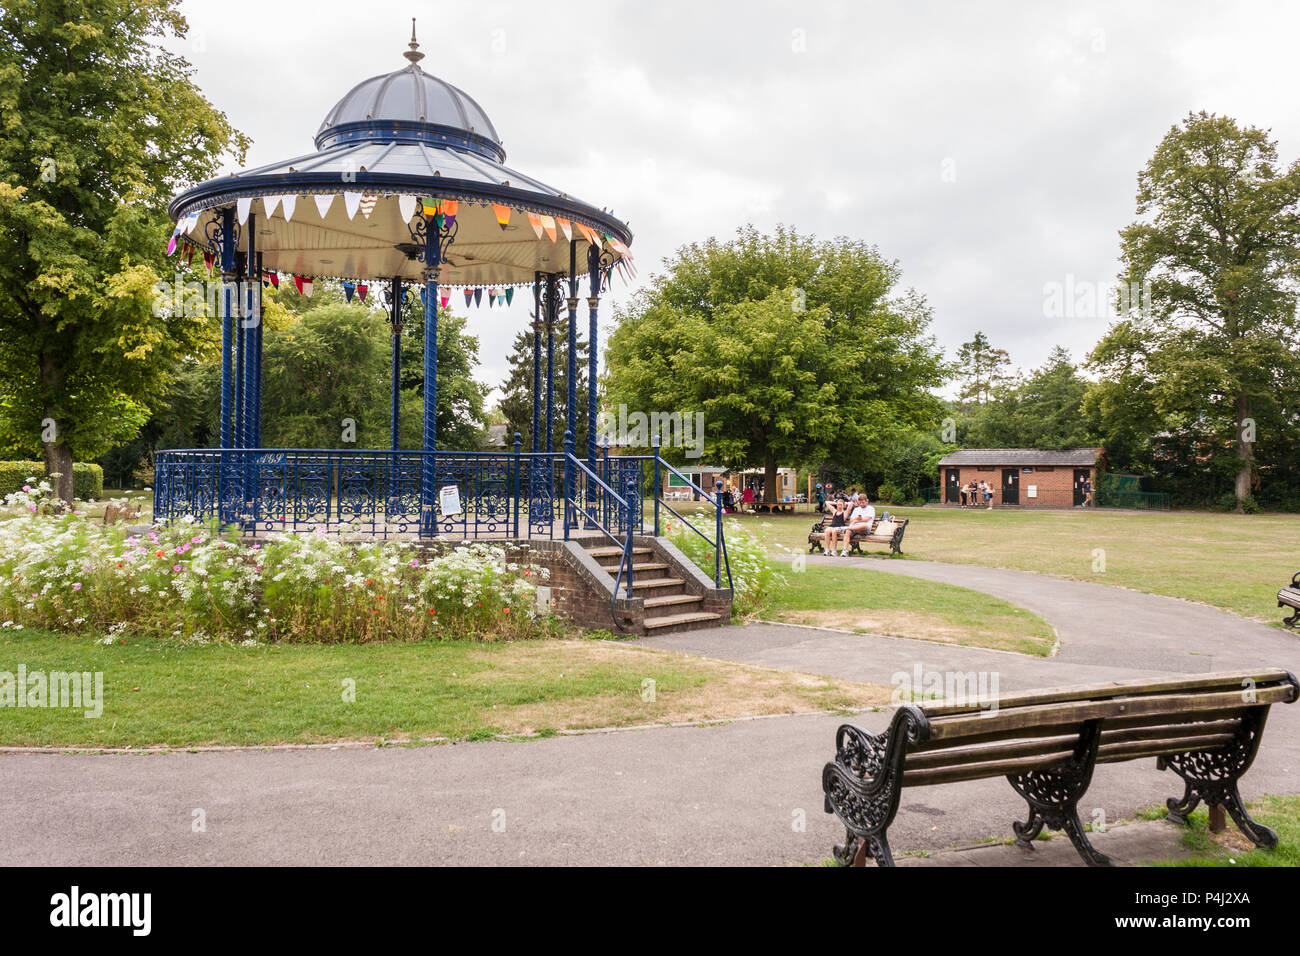 War Memorial Park bandstand, Romsey, Hampshire, England, GB, UK. The bandstand was restored in 2002 based on Victorian castings. Stock Photo